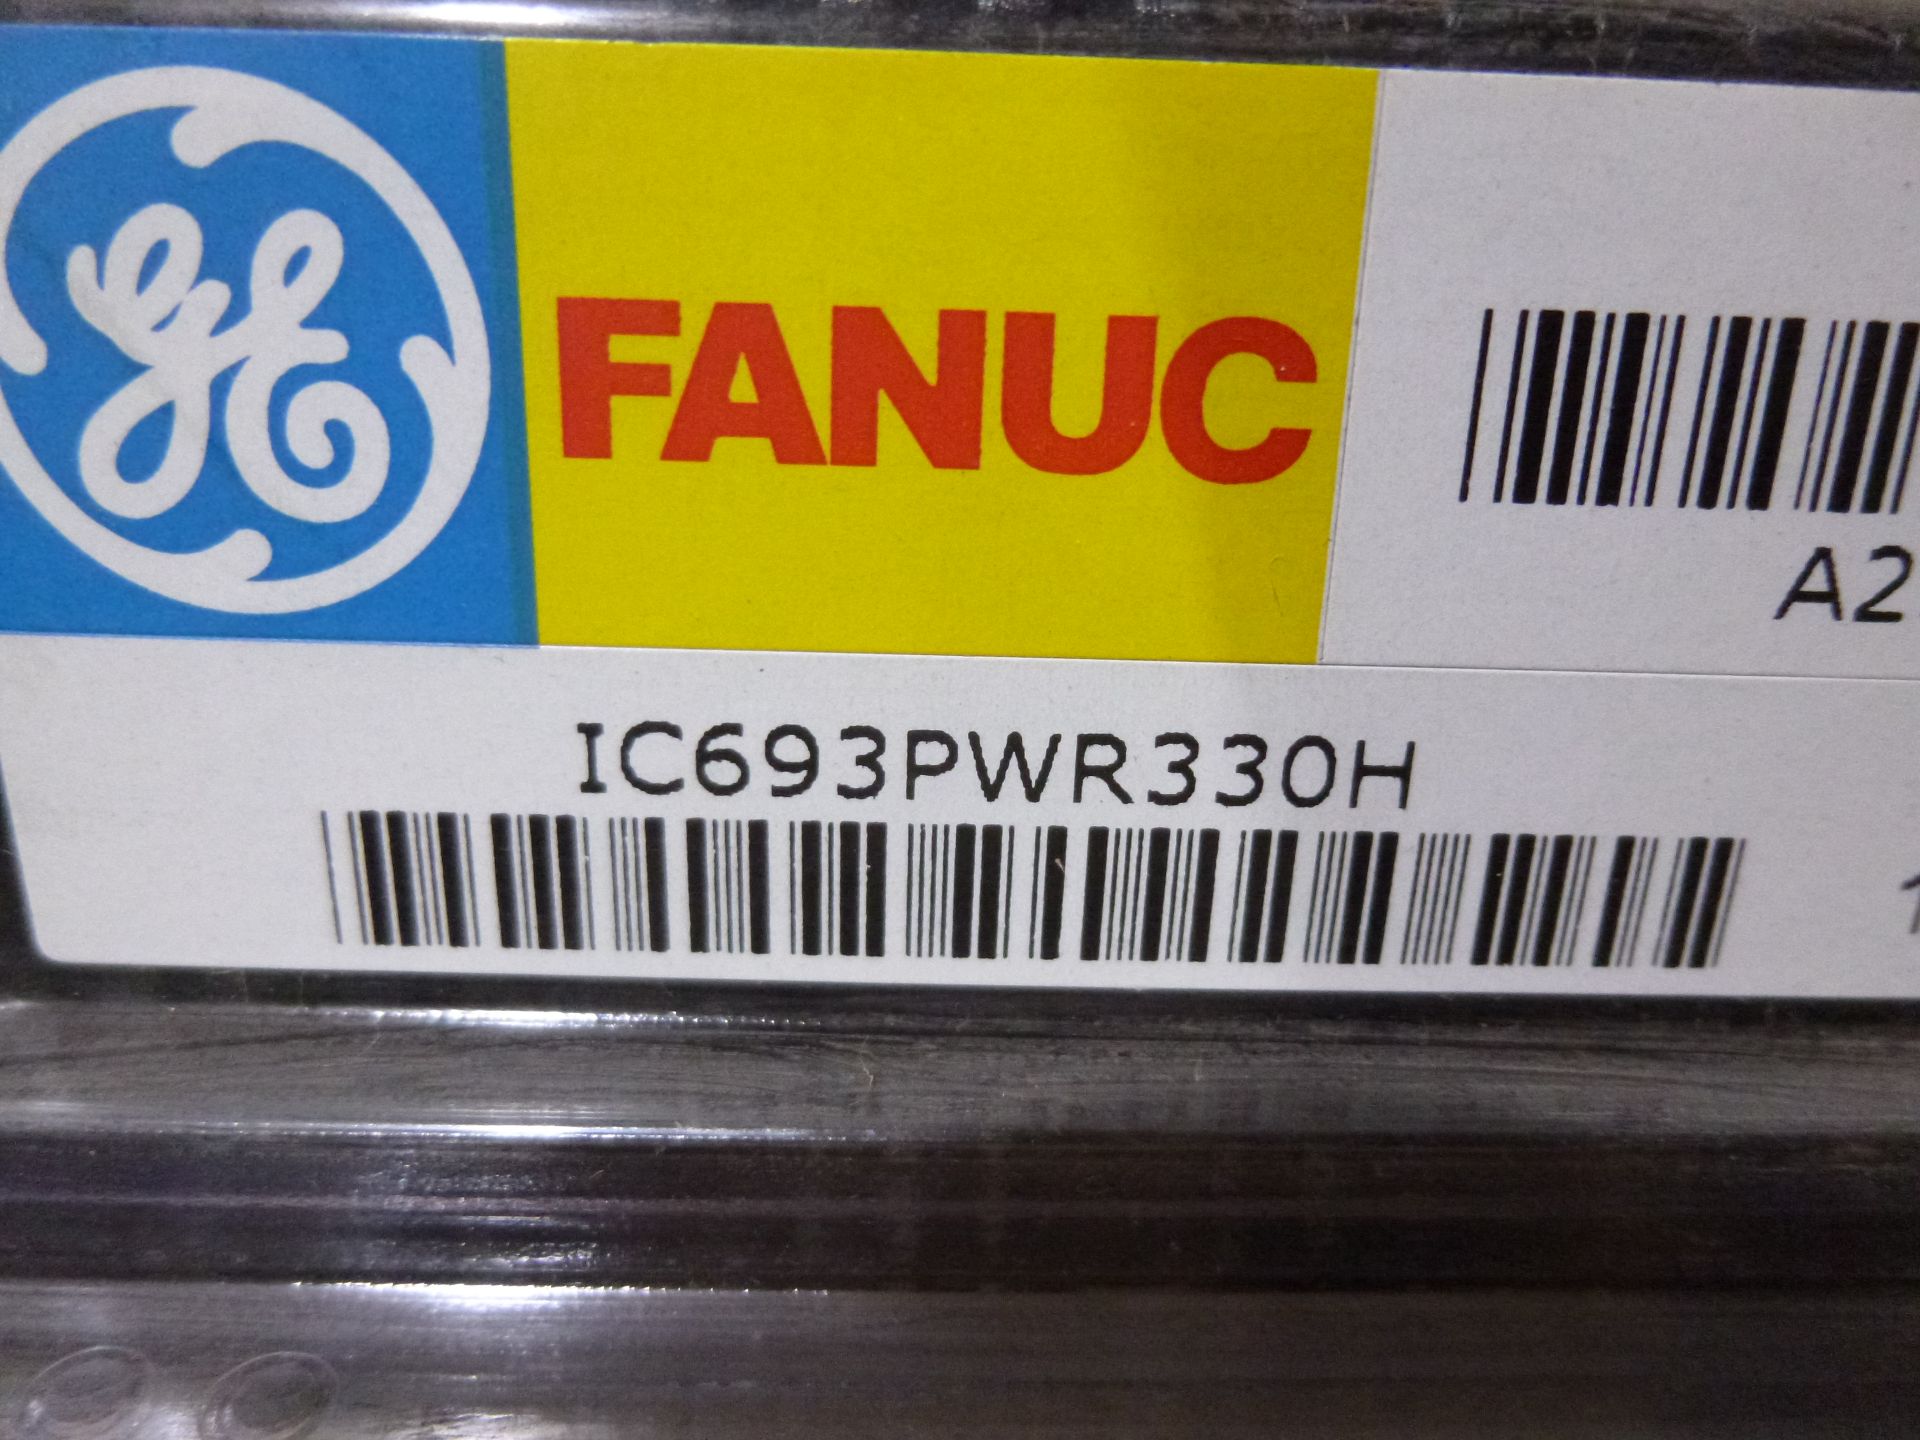 Qty 2 GE Fanuc IC693PWR330H, as always with Brolyn LLC auctions, all lots can be picked up from - Image 2 of 2